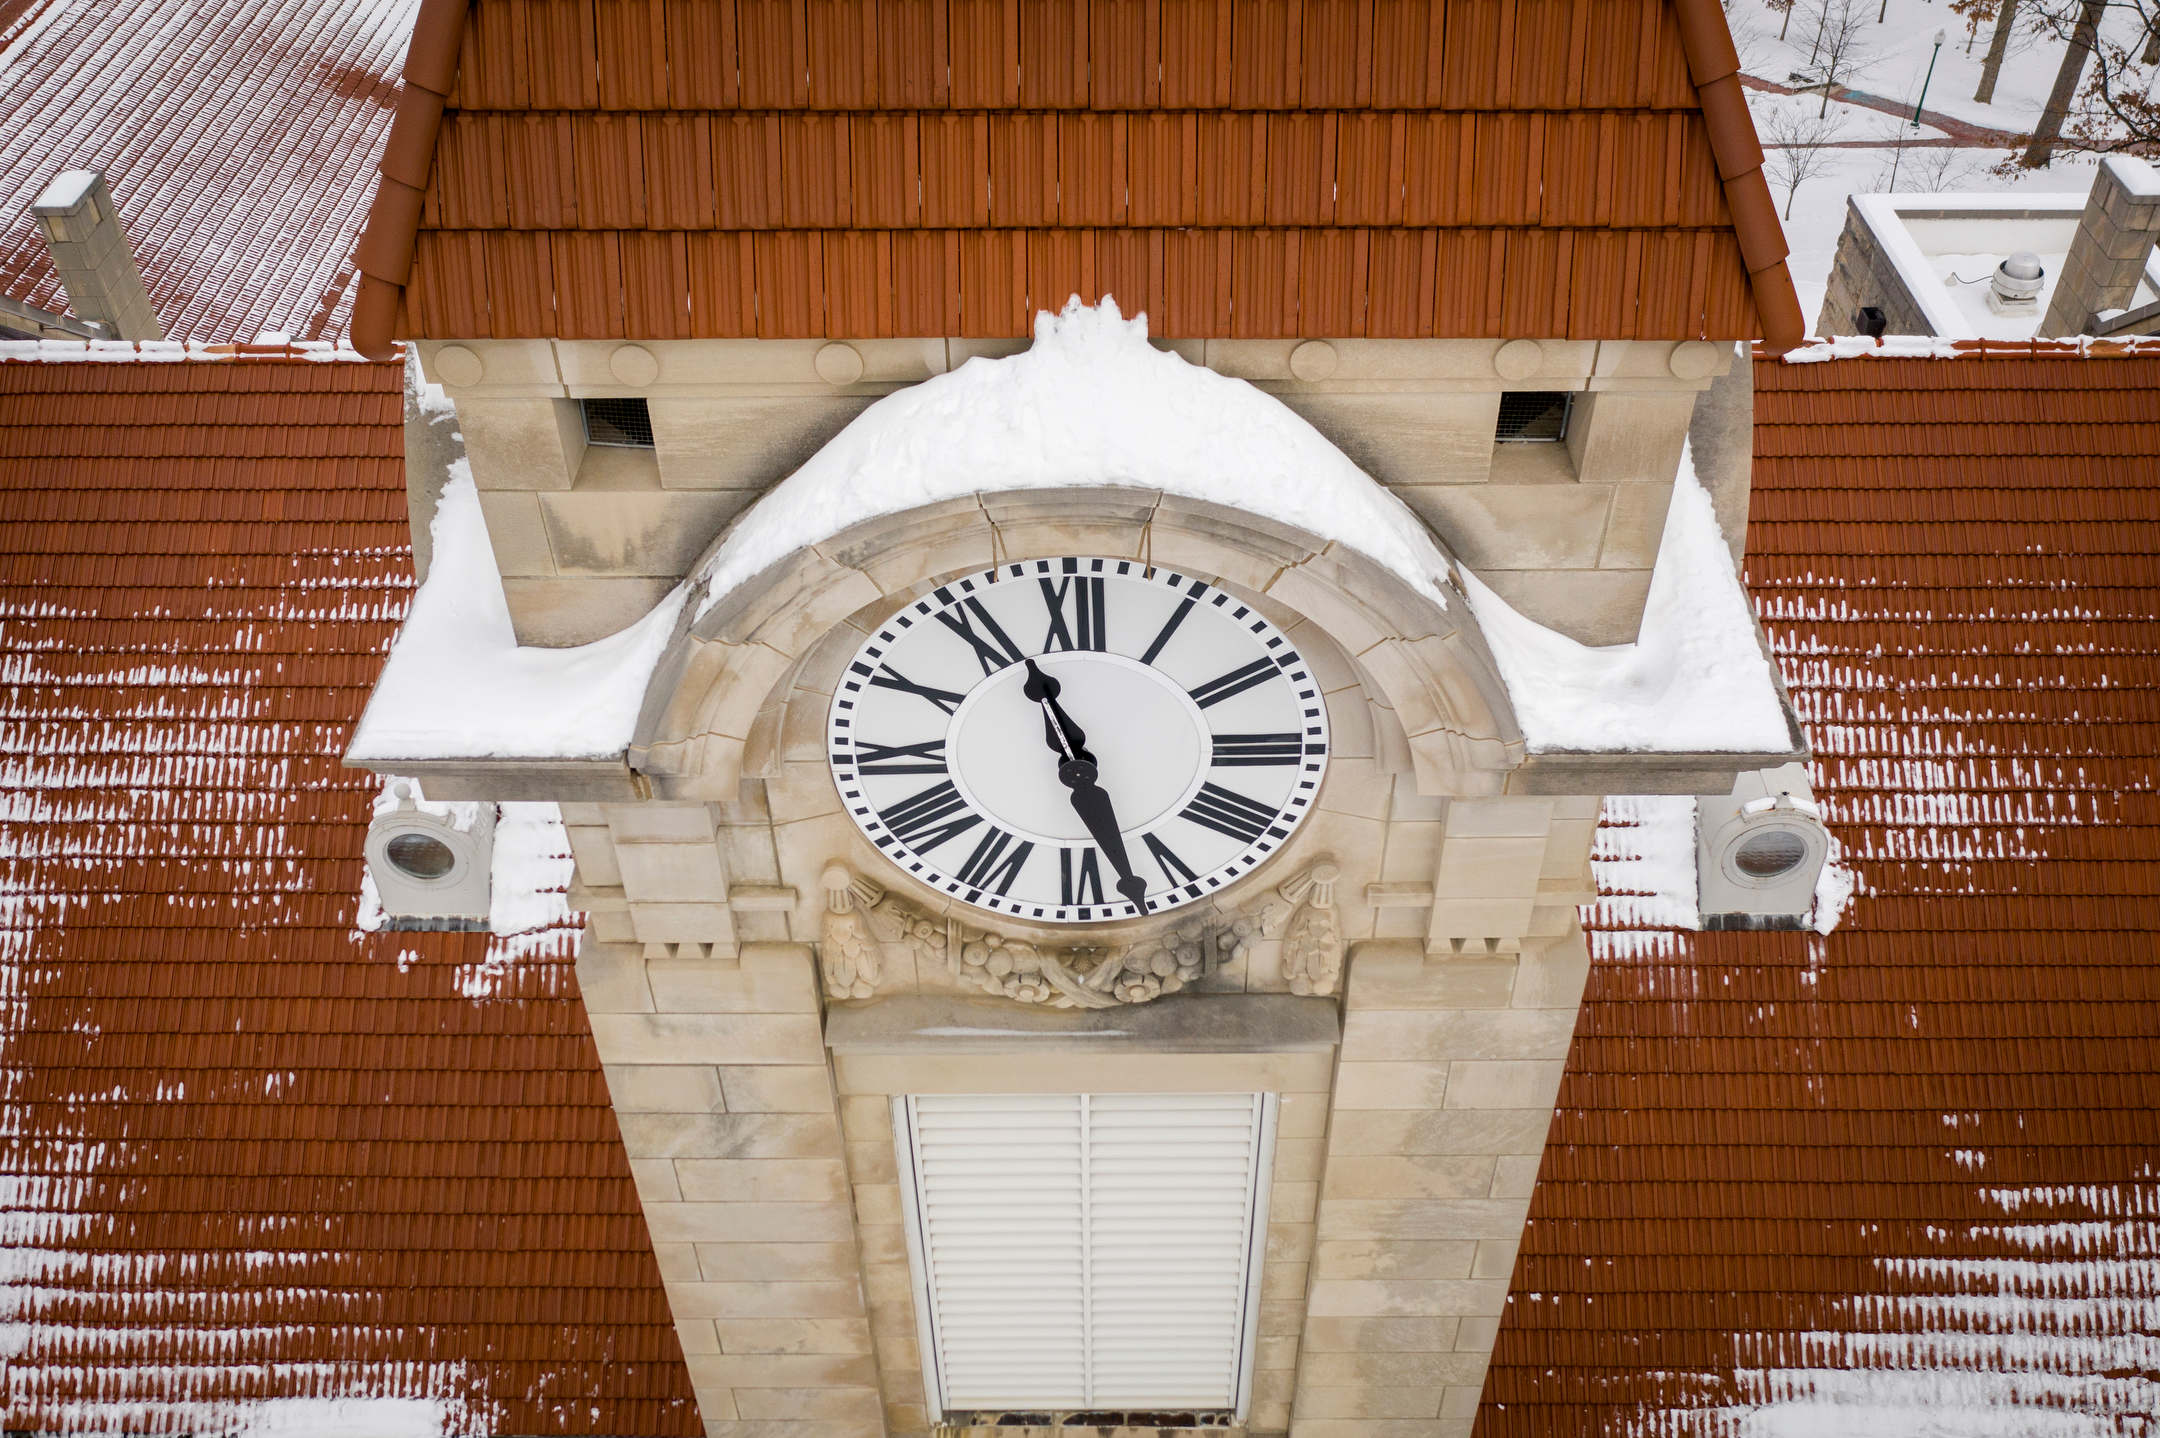 Snow clings to limestone features on the Student Building clock tower at Indiana University Bloomington on Friday, Feb. 12, 2021.